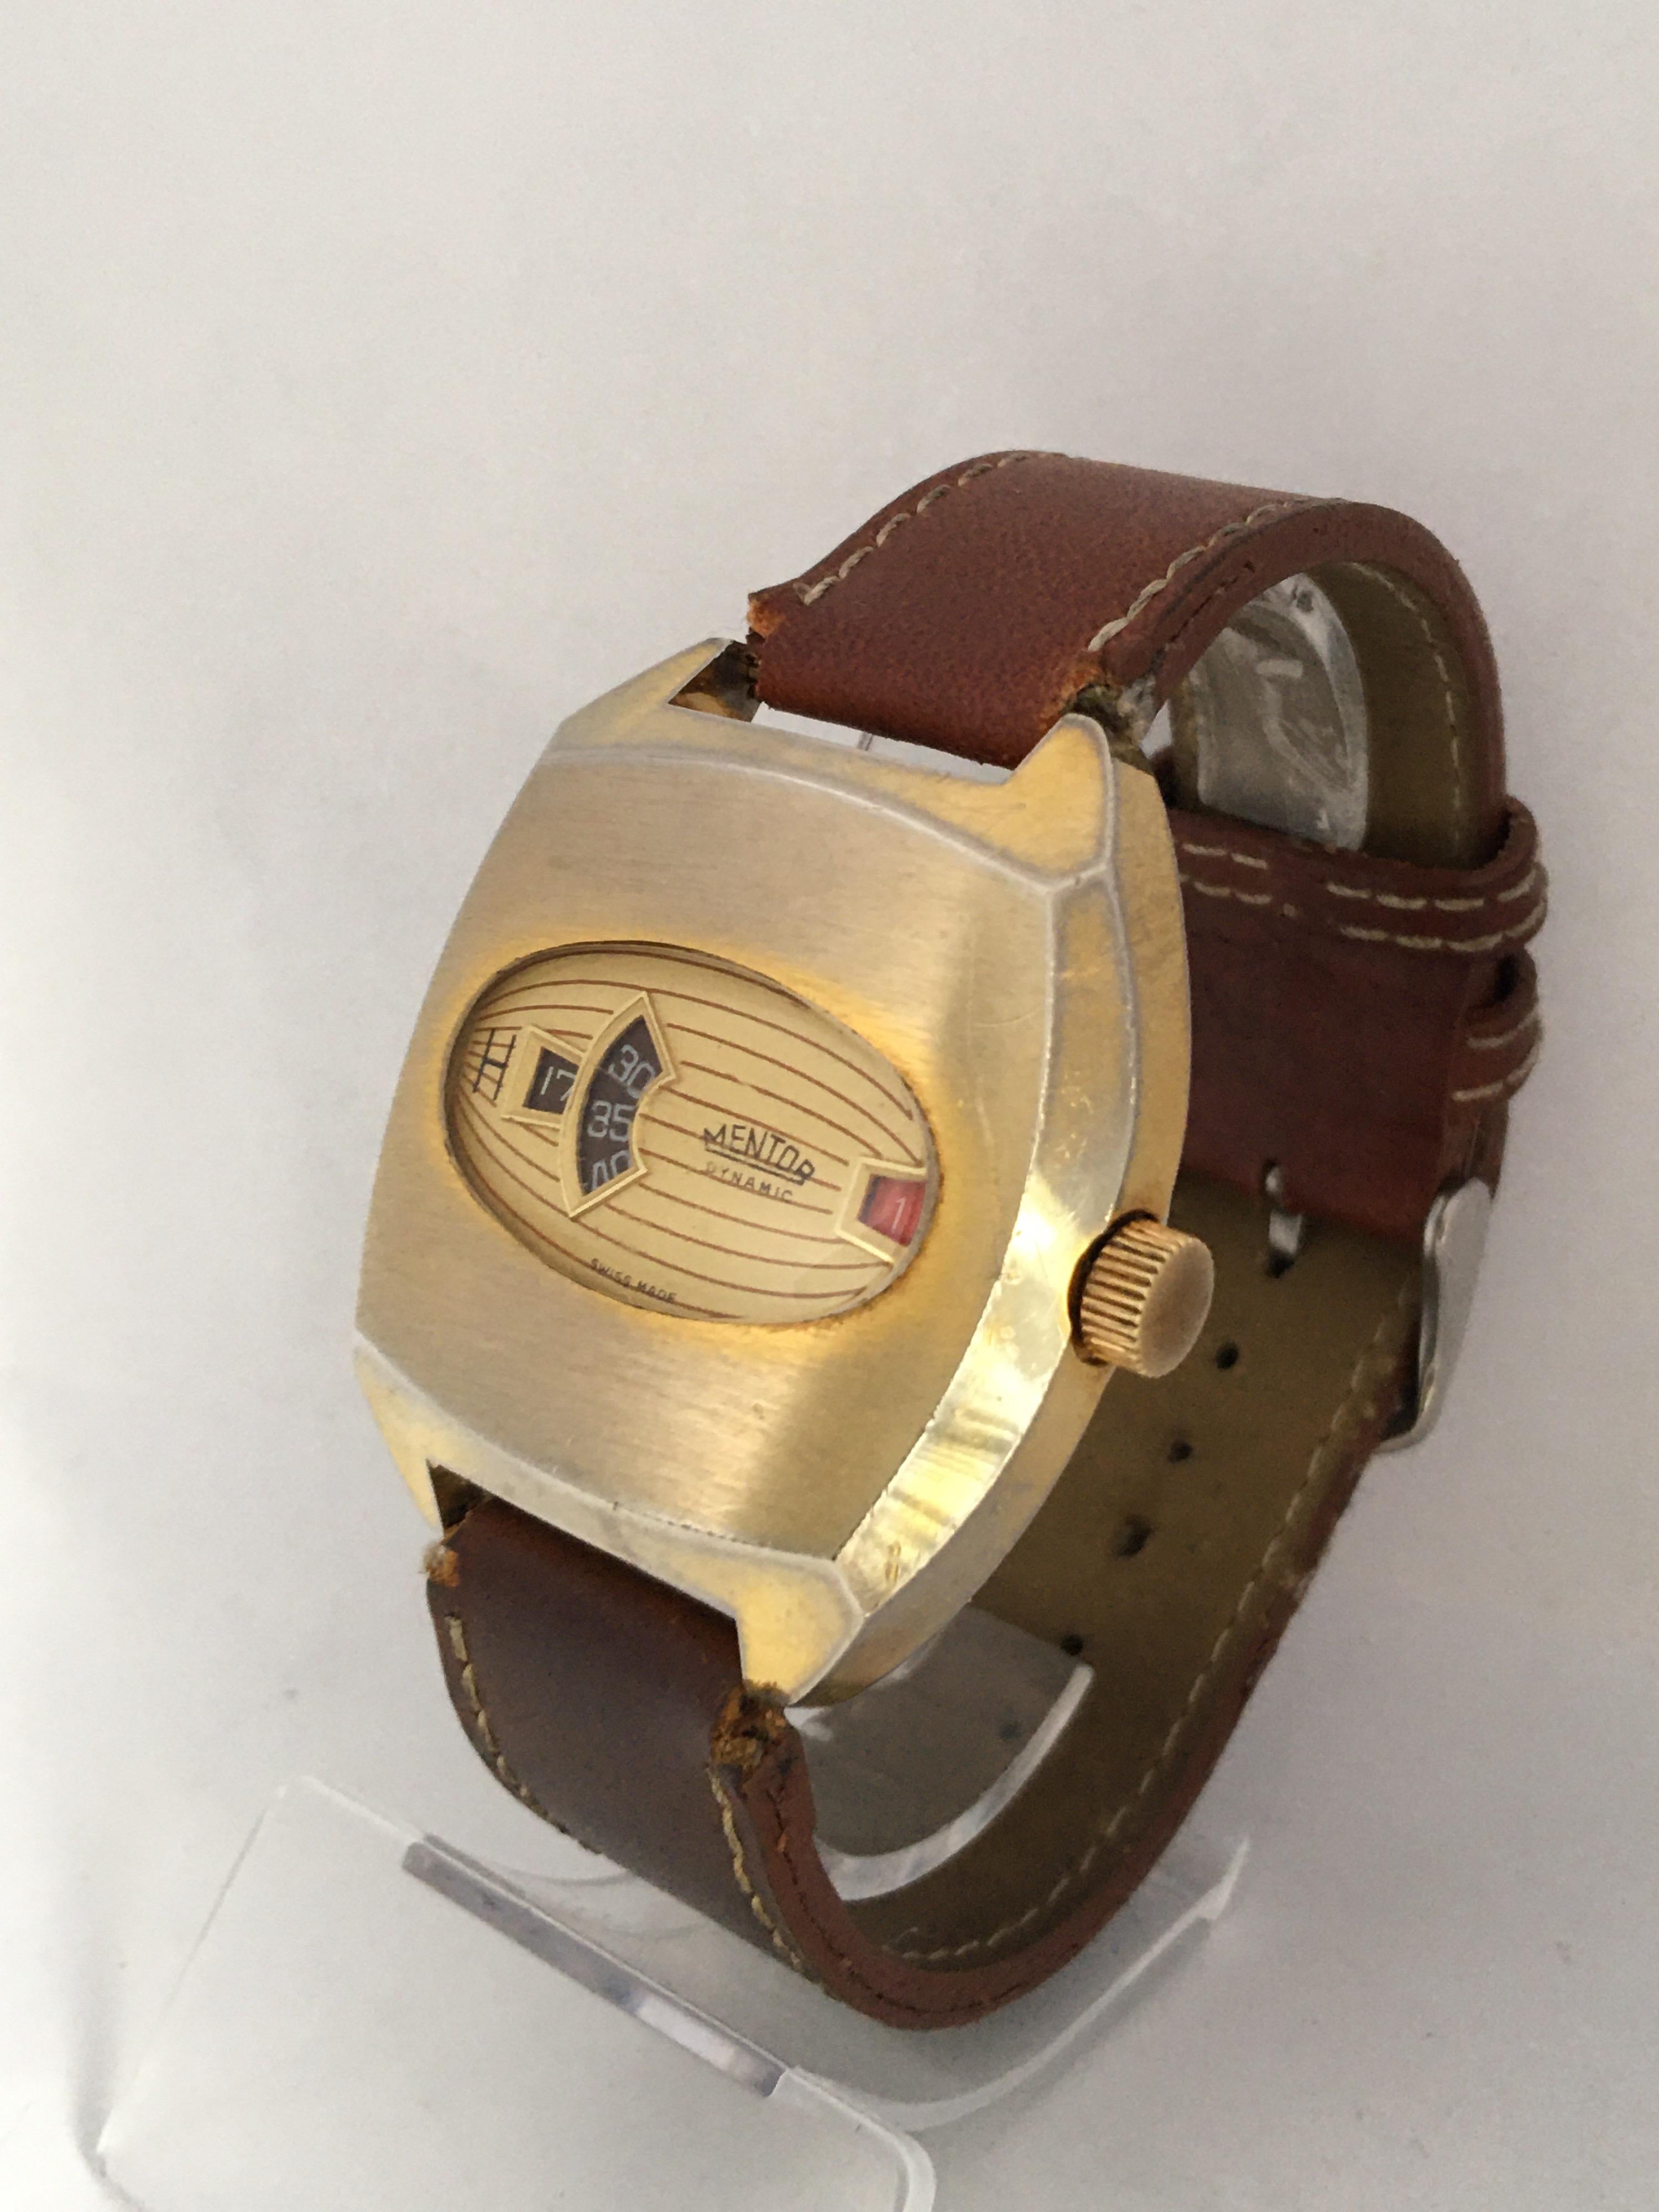 This charming vintage mechanical Digital Watch is working and it is ticking well. A good time keeping for its age. Visible signs of Ageing and used with some tarnished and scratches on the gold plated watch case and some scratches on the stainless